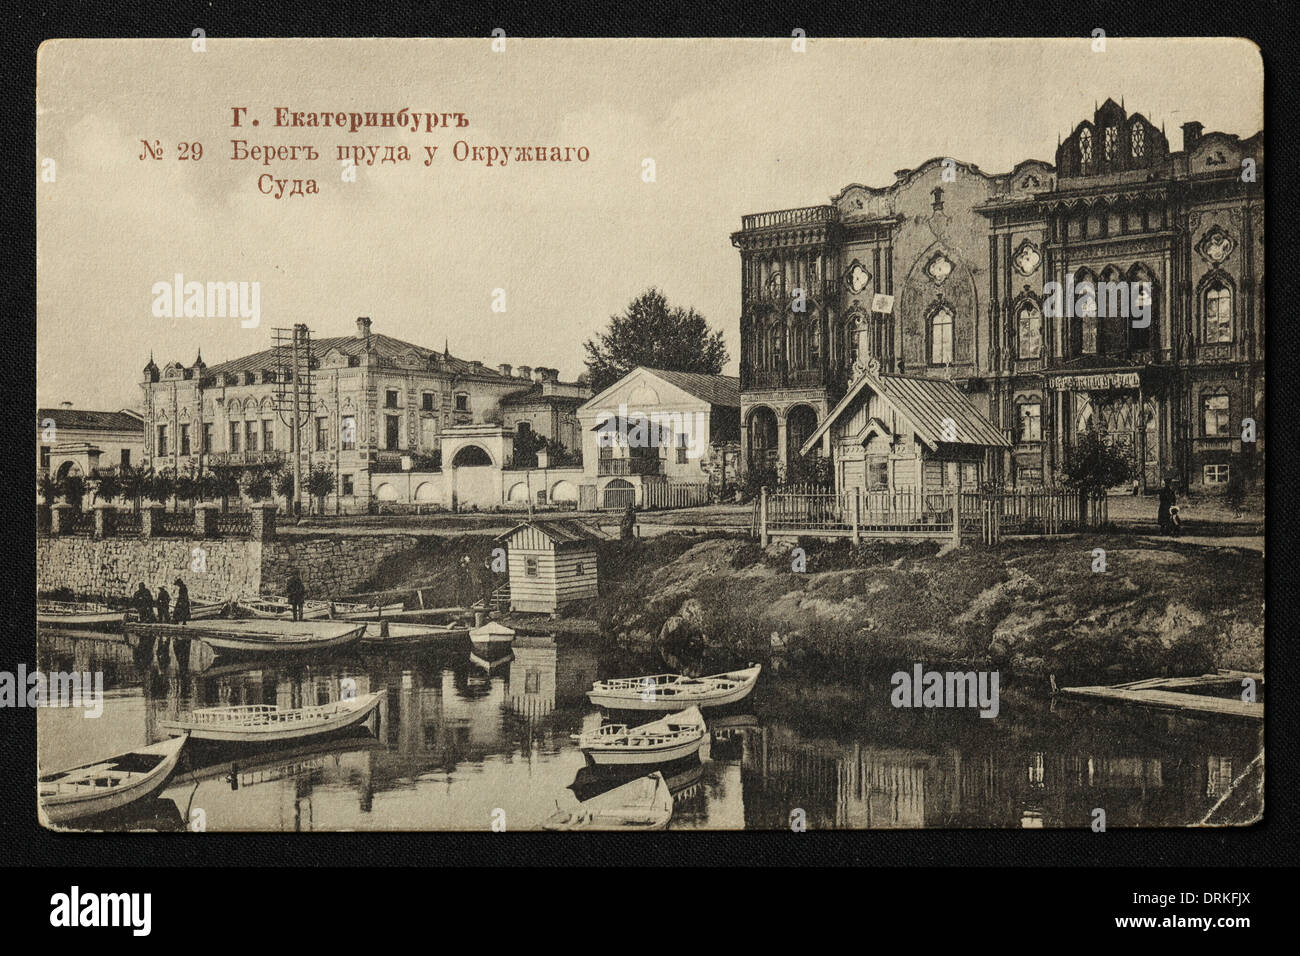 Tarasovskaya Embankment of the Iset River near the District Court in Yekaterinburg, Russian Empire. Black and white vintage photograph by Russian photographer Veniamin Metenkov dated from the beginning of the 20th century issued in the Russian vintage postcard published by Veniamin Metenkov himself in Yekaterinburg. Text in Russian: Yekaterinburg. Bank of the pond near the District Court. The Iset River forms the City Pond (Gorodskoy Pond) in the city centre of Yekaterinburg. The District Court also known as Sevastianov House or the Trade Union House is the architectural monument from the 19th Stock Photo